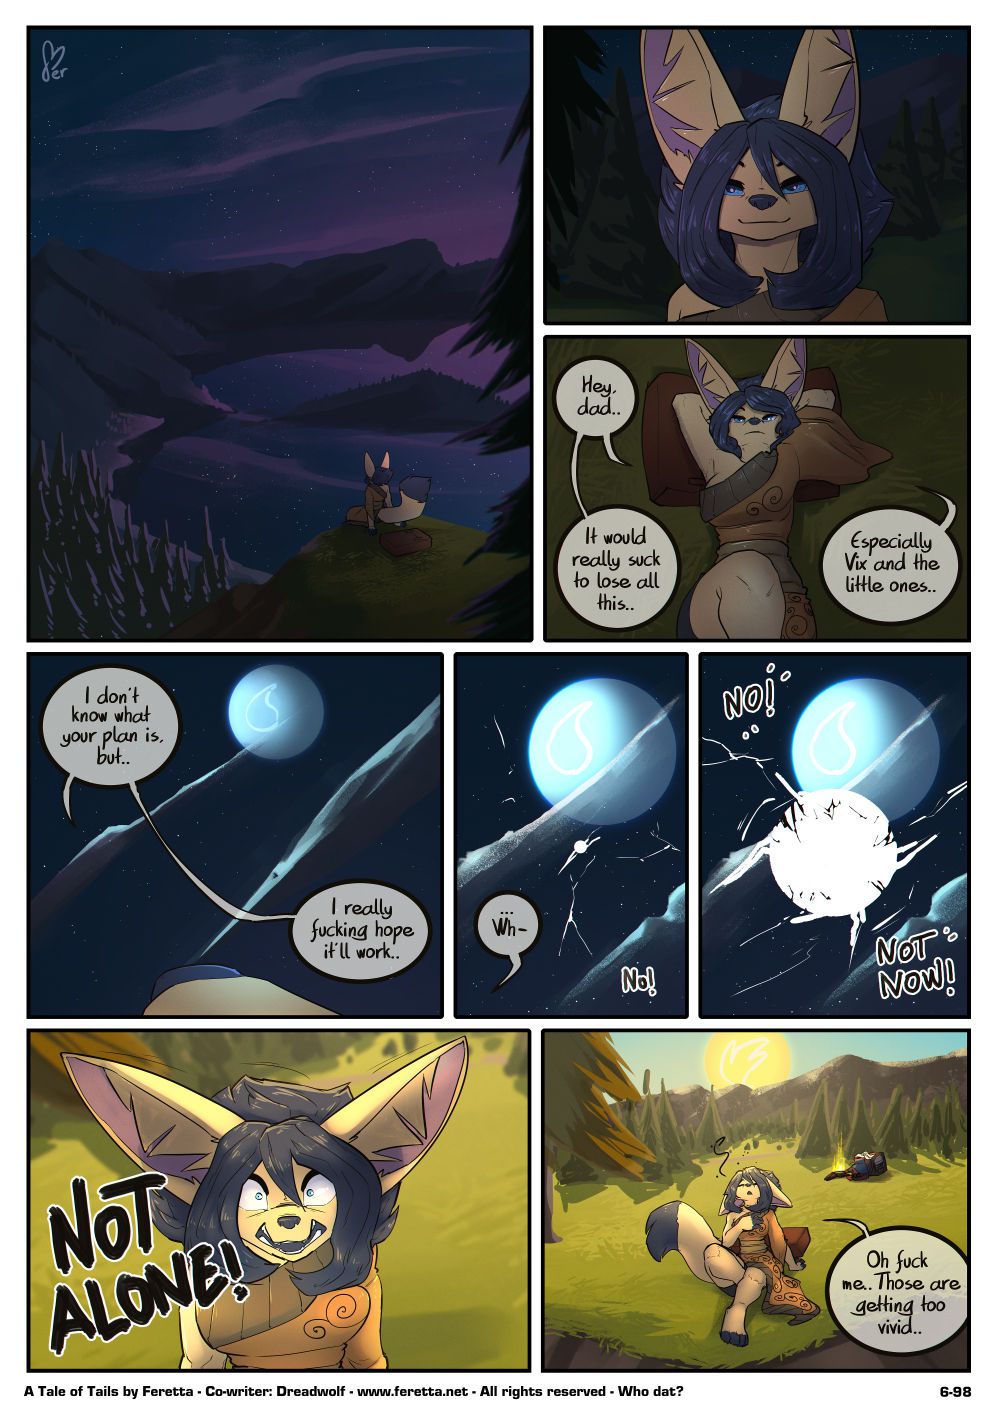 [Feretta] A Tale of Tails: Chapter 6 - Paths converge (ongoing) 101